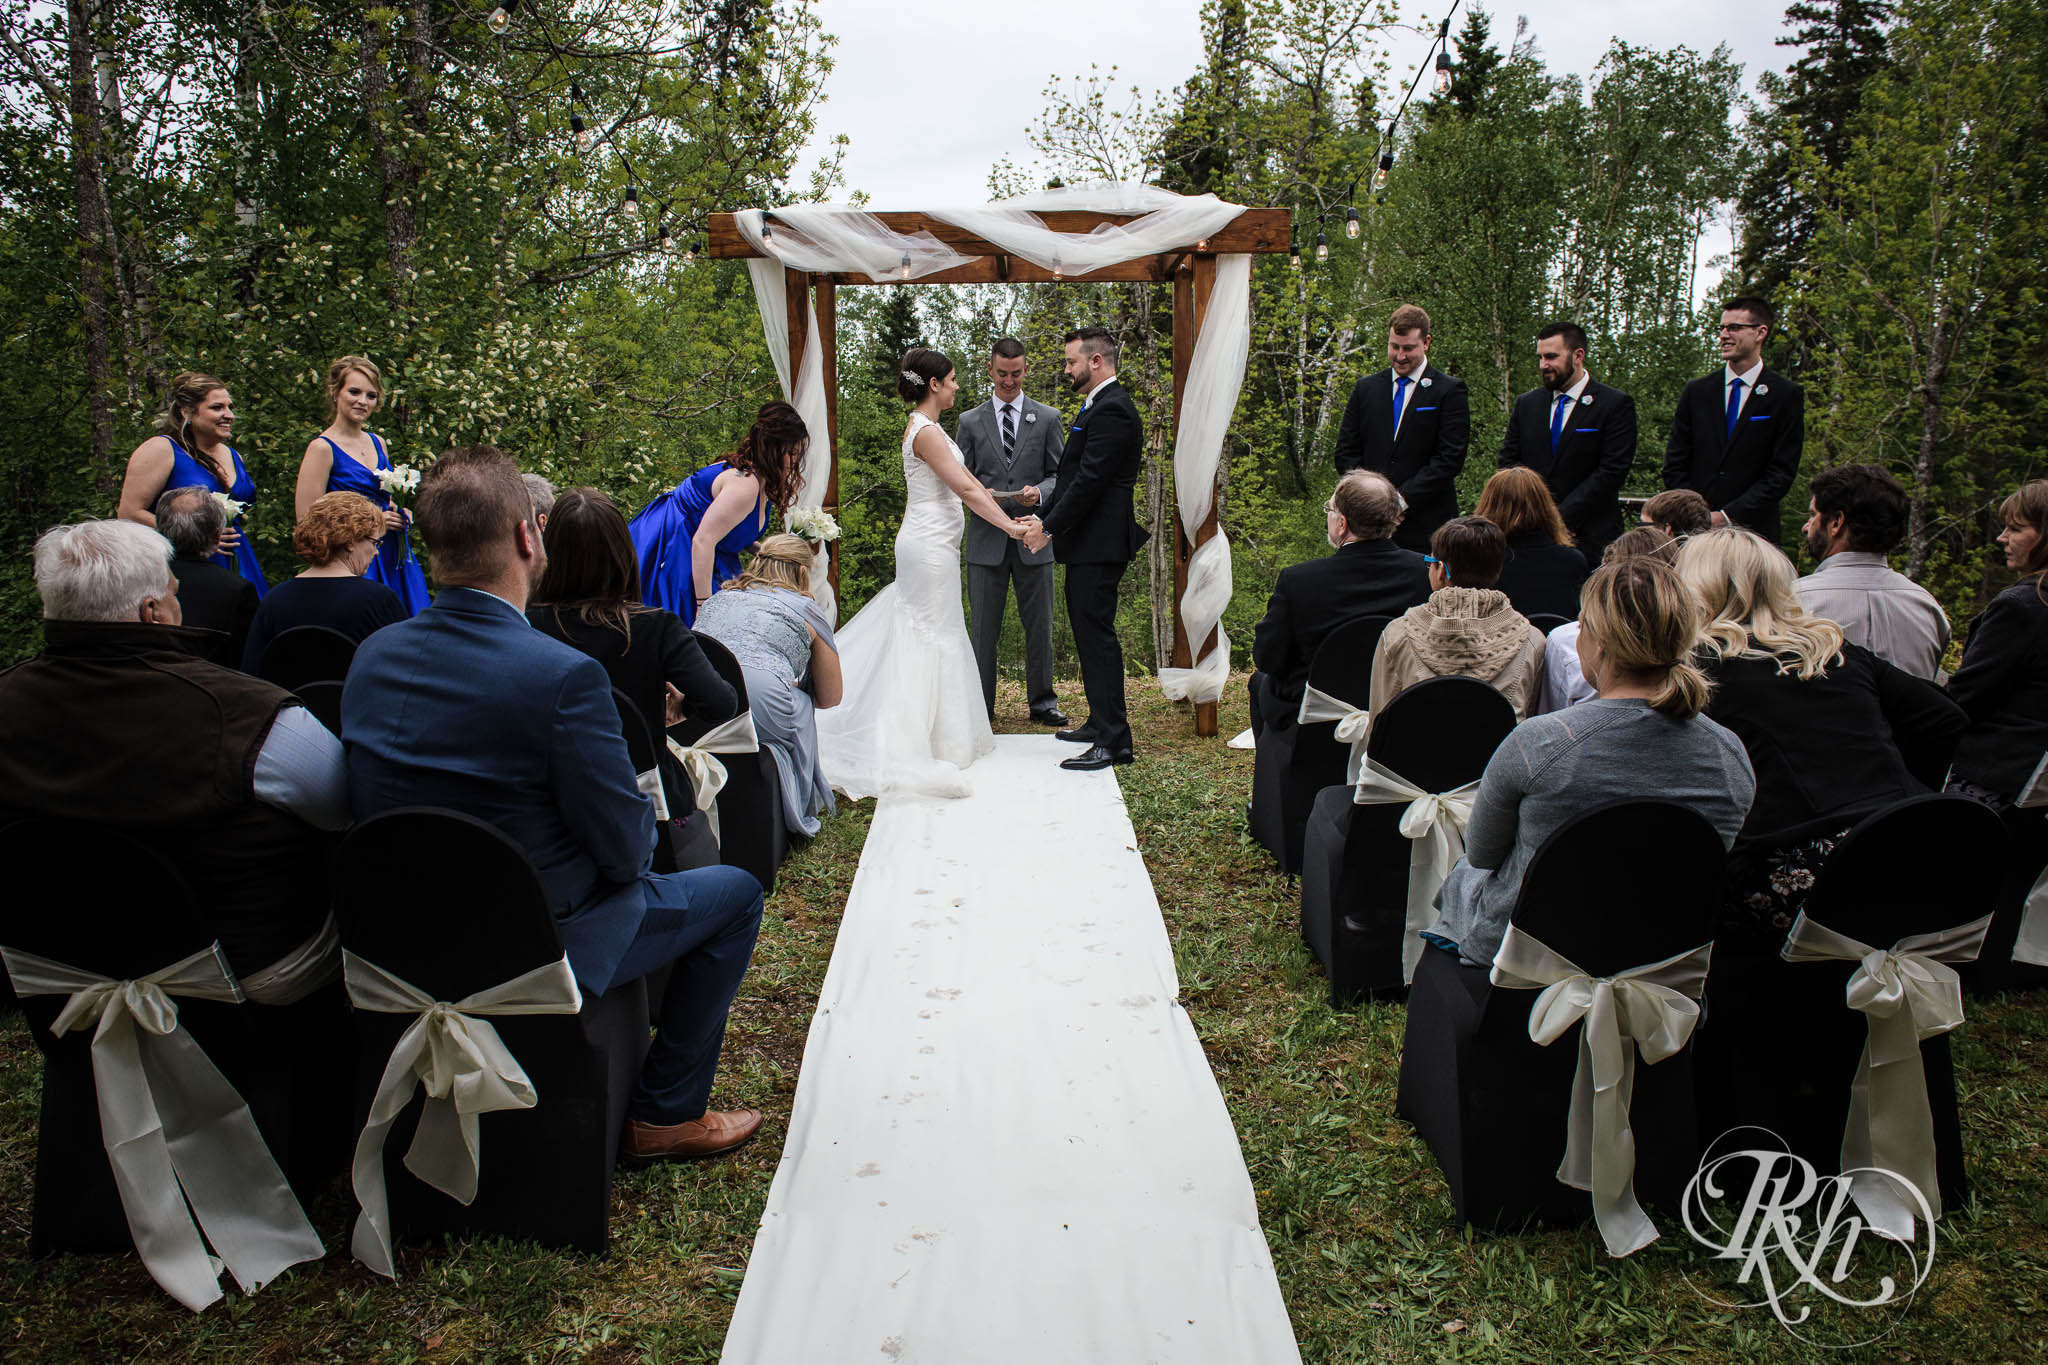 Bride and groom smile in backyard ceremony setup in the North Shore in Minnesota.